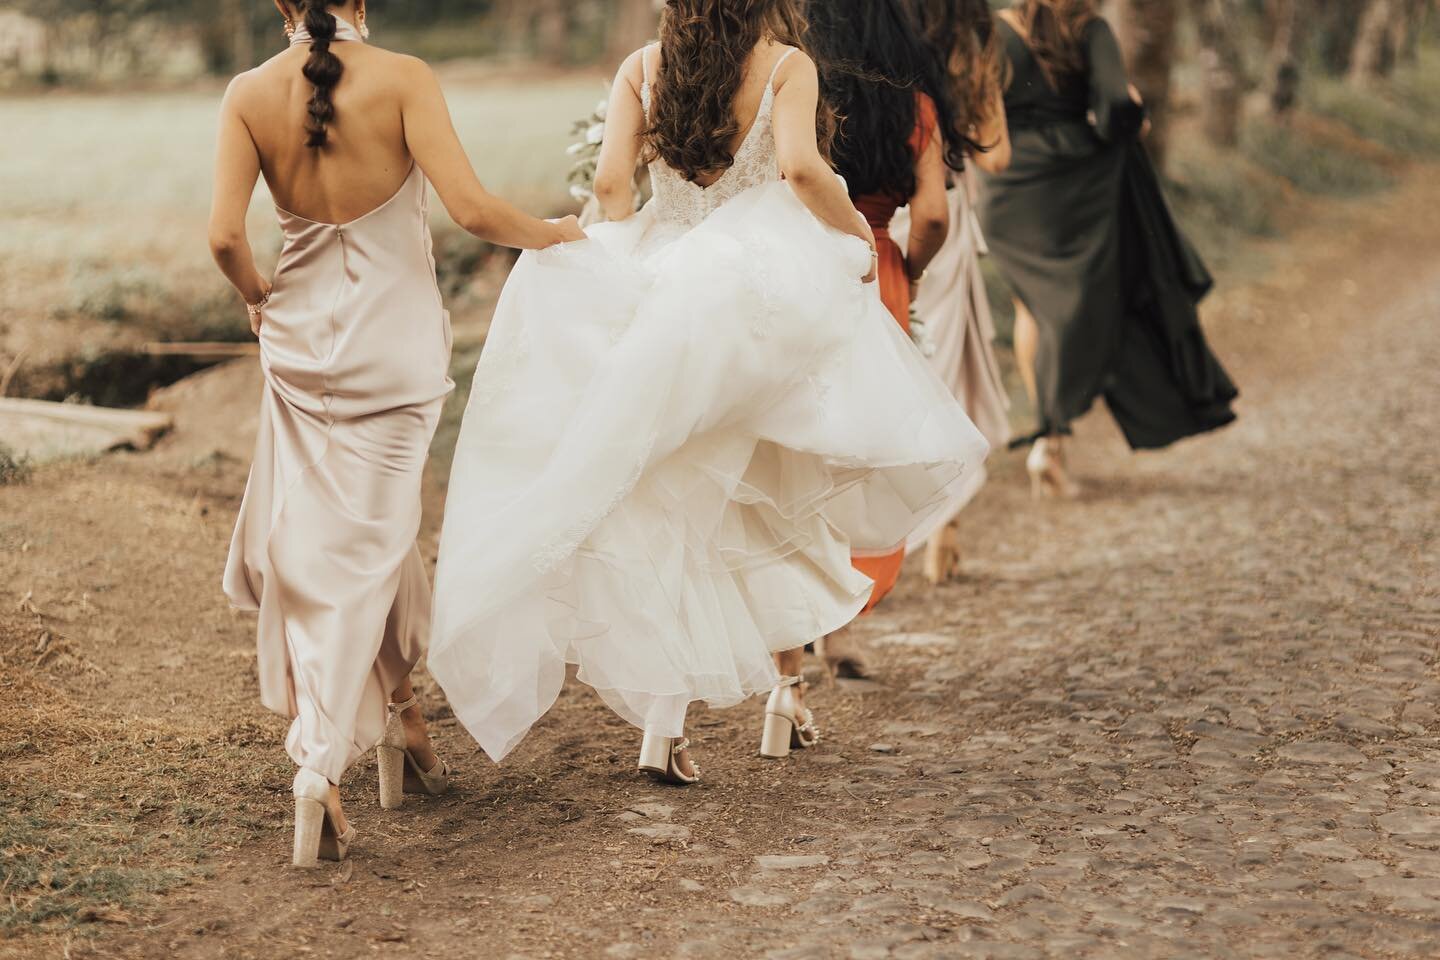 Let&rsquo;s go girls ❤️✨⁣
⁣⁣⁣
⁣
⁣
⁣⁣⁣
#ecuadorweddingphotographer #cartagenaweddingphotographer #miamiweddingphotographer #italyweddingphotographer #santoriniweddingphotographer #cancunweddingphotographer #californiaweddingphotographer #ibizaweddingp